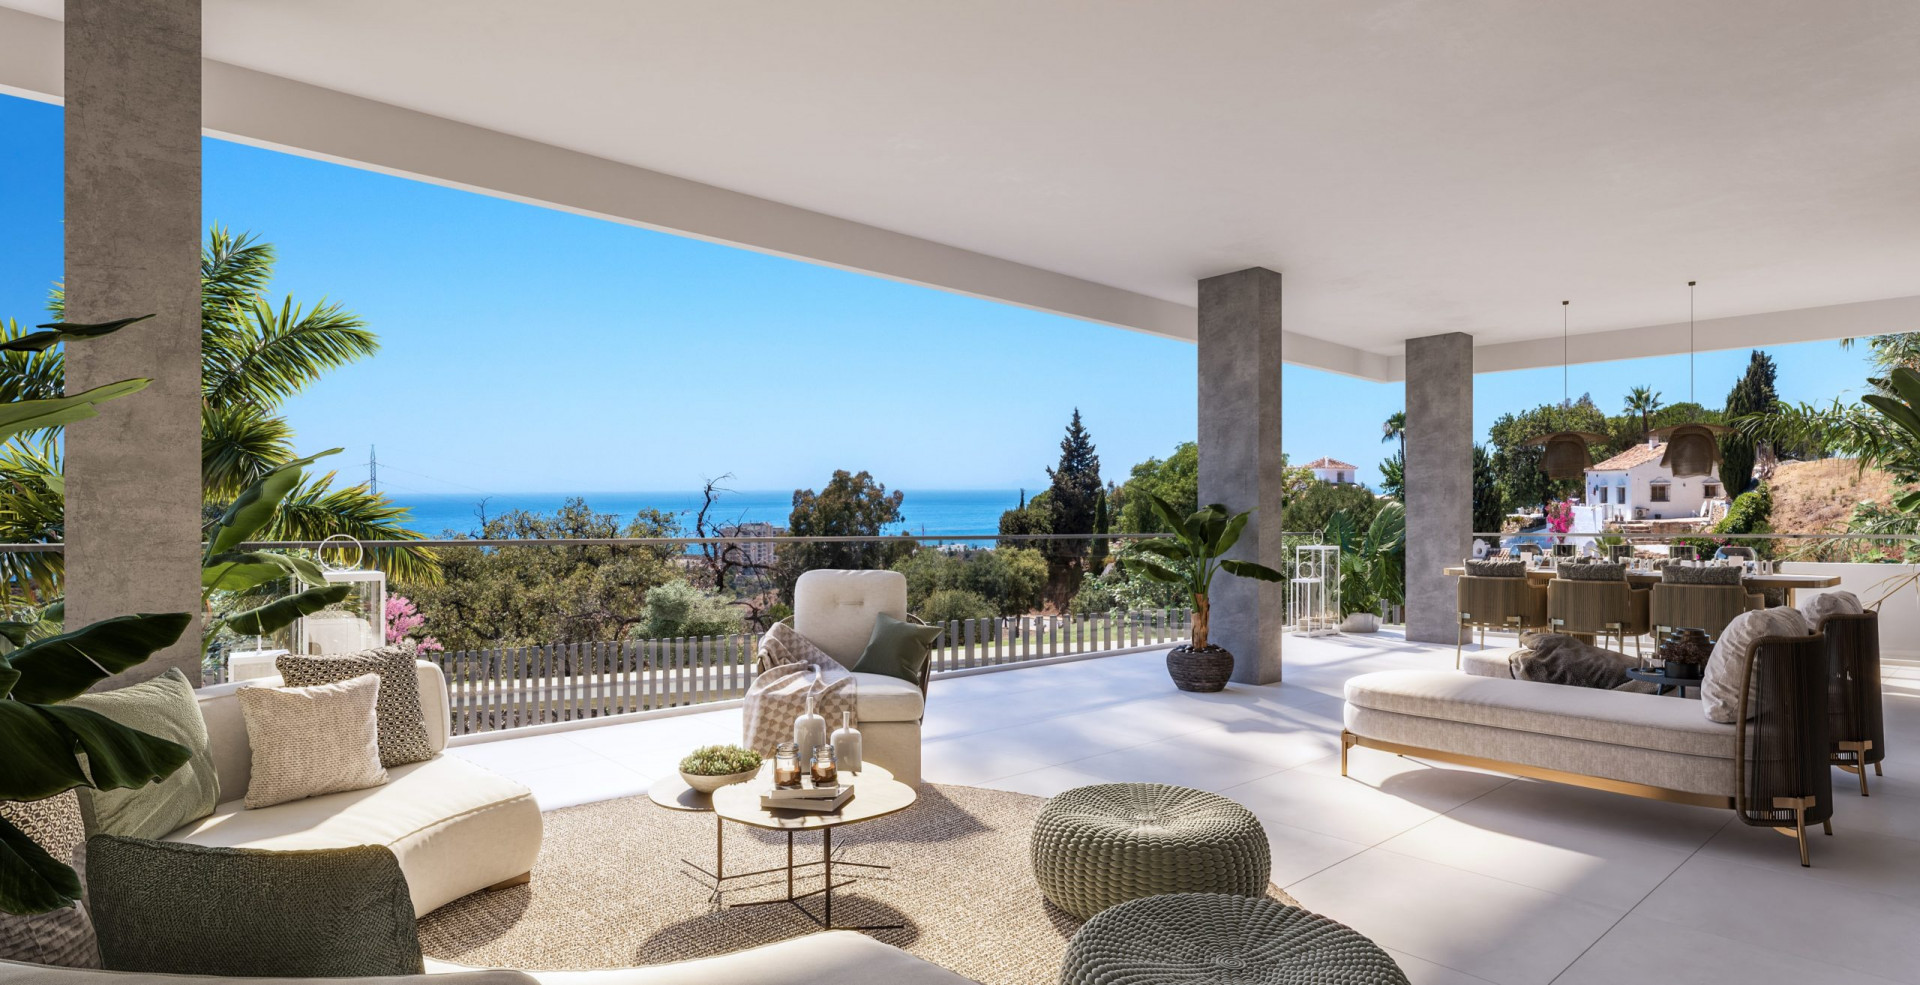 Three bedroom penthouse with solarium and panoramic views of the coastline east of Marbella. | Image 1